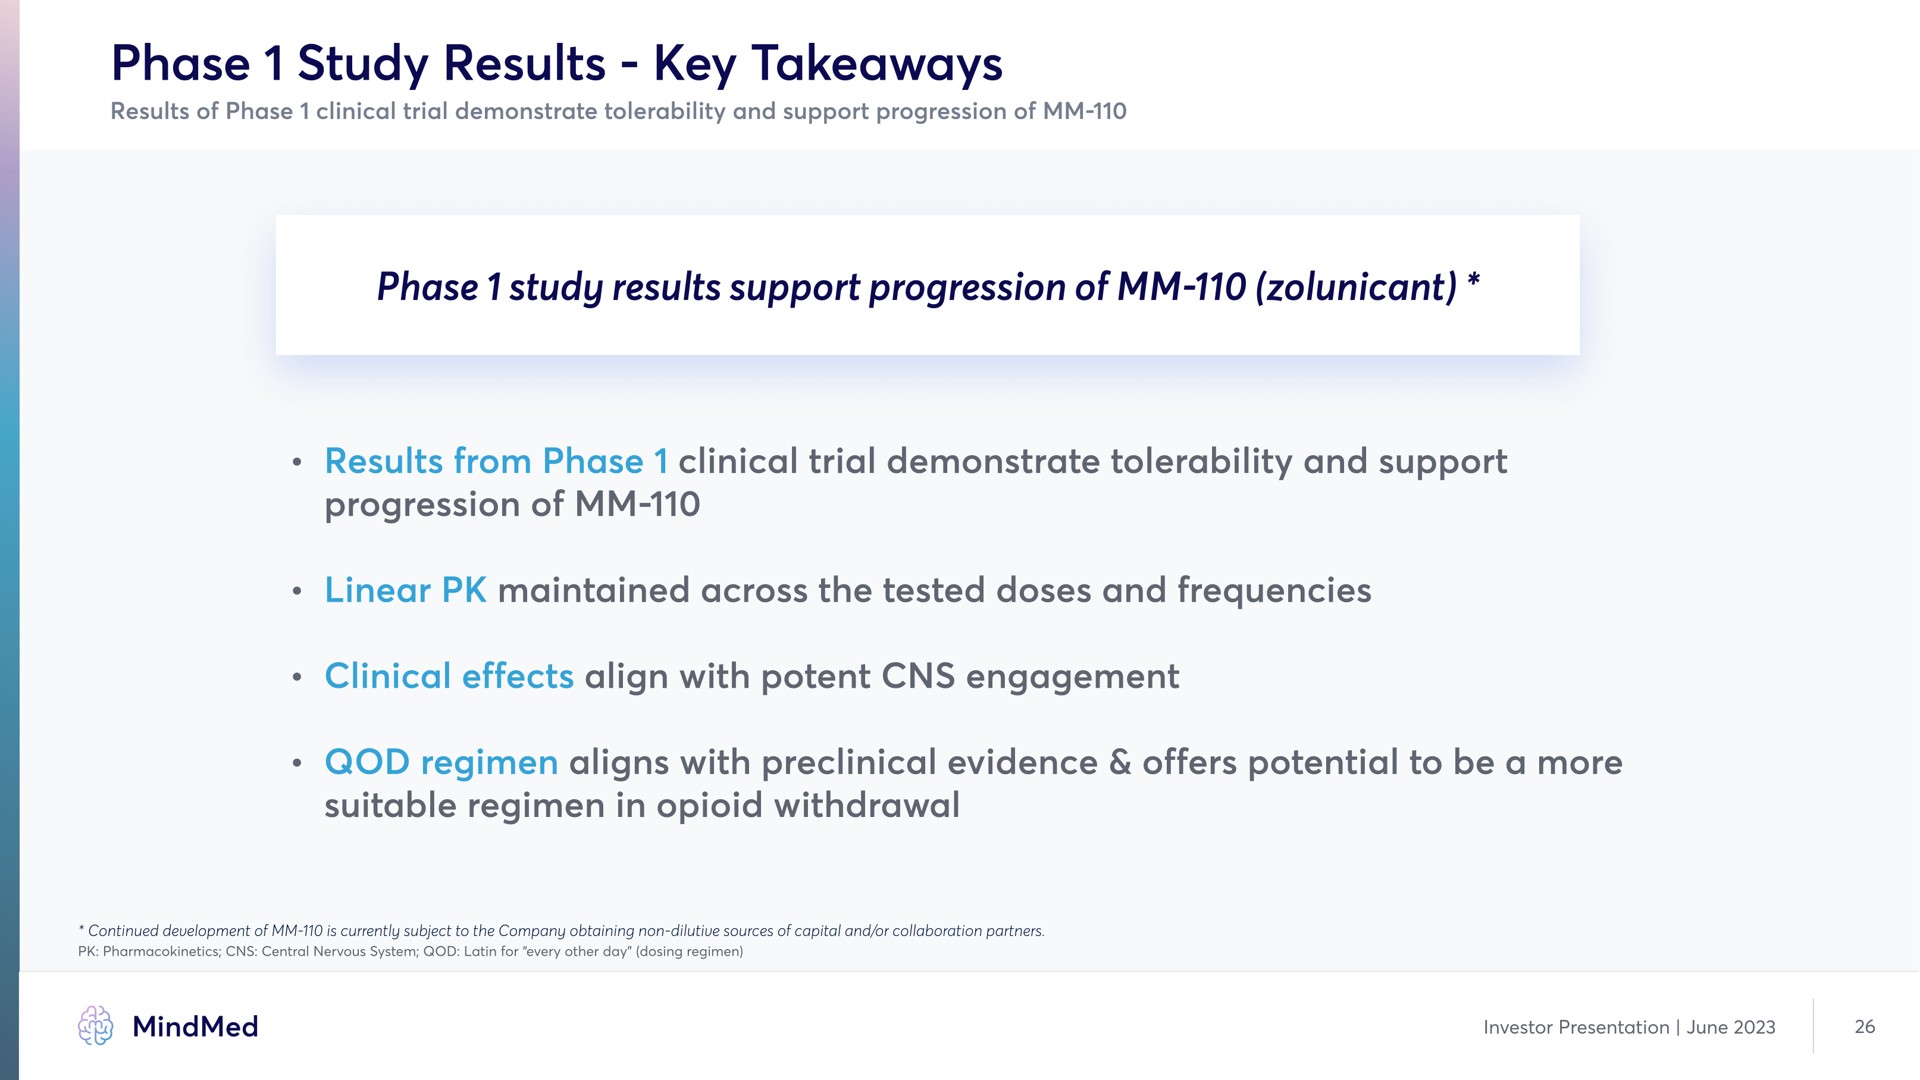 phase study results key phase study results support progression of results from phase progression of clinical trial demonstrate tolerability and support linear maintained across the tested doses and clinical effects align with potent regimen suitable regimen in withdrawal aligns with preclinical evidence offers potential to be a more frequencies engagement | MindMed